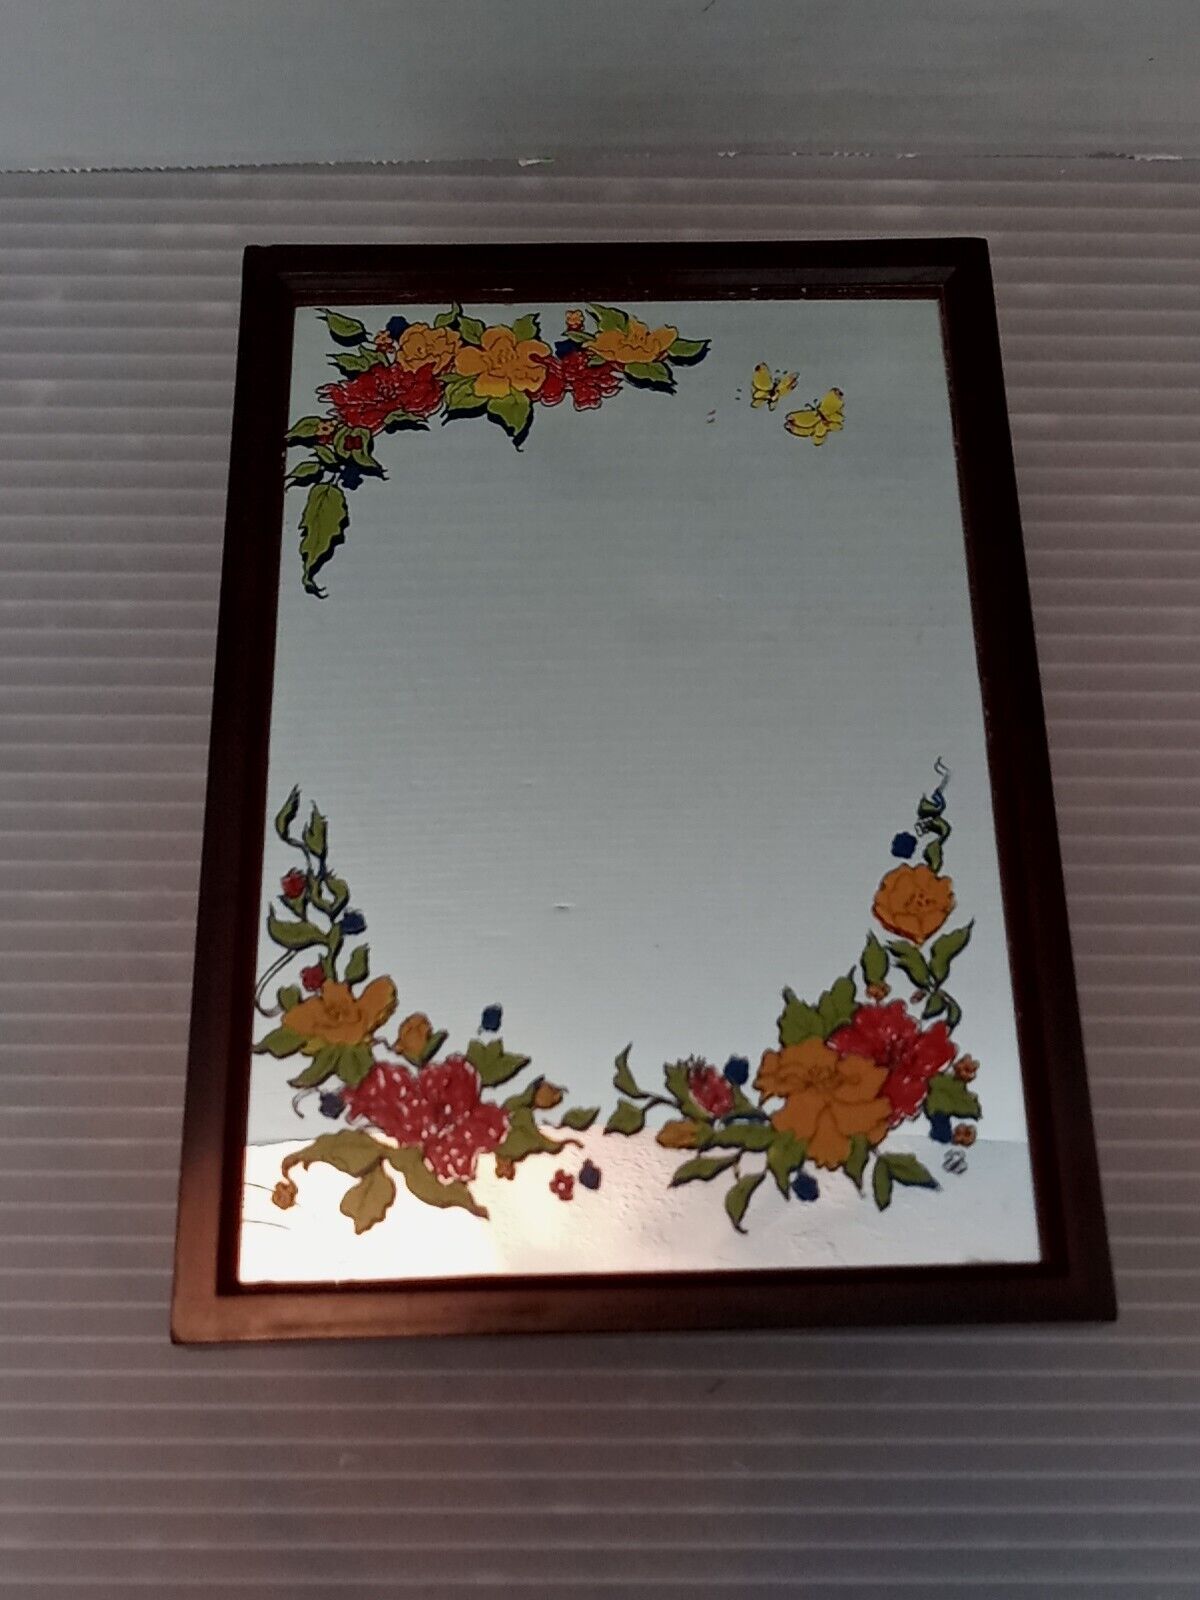 Vintage 1978 Yaps Music Box Love Story Floral Mirror Decor End Table - Works